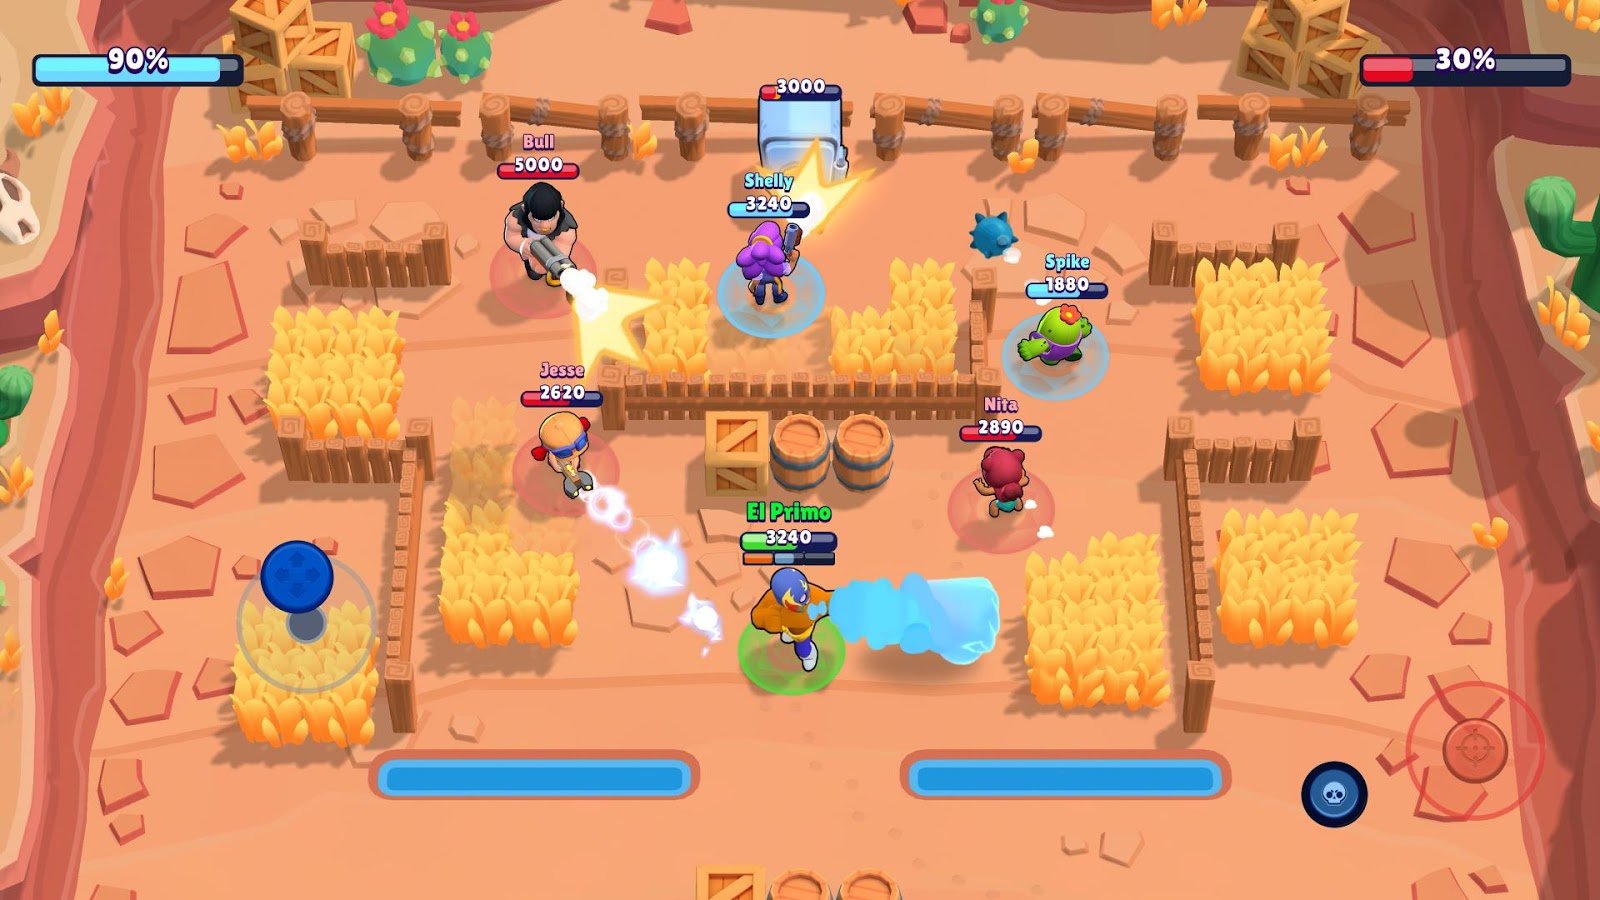 Brawl Stars Is Bite Sized Fun That Strips Away Too Much To Be Great South China Morning Post - brawl stars mobile moba